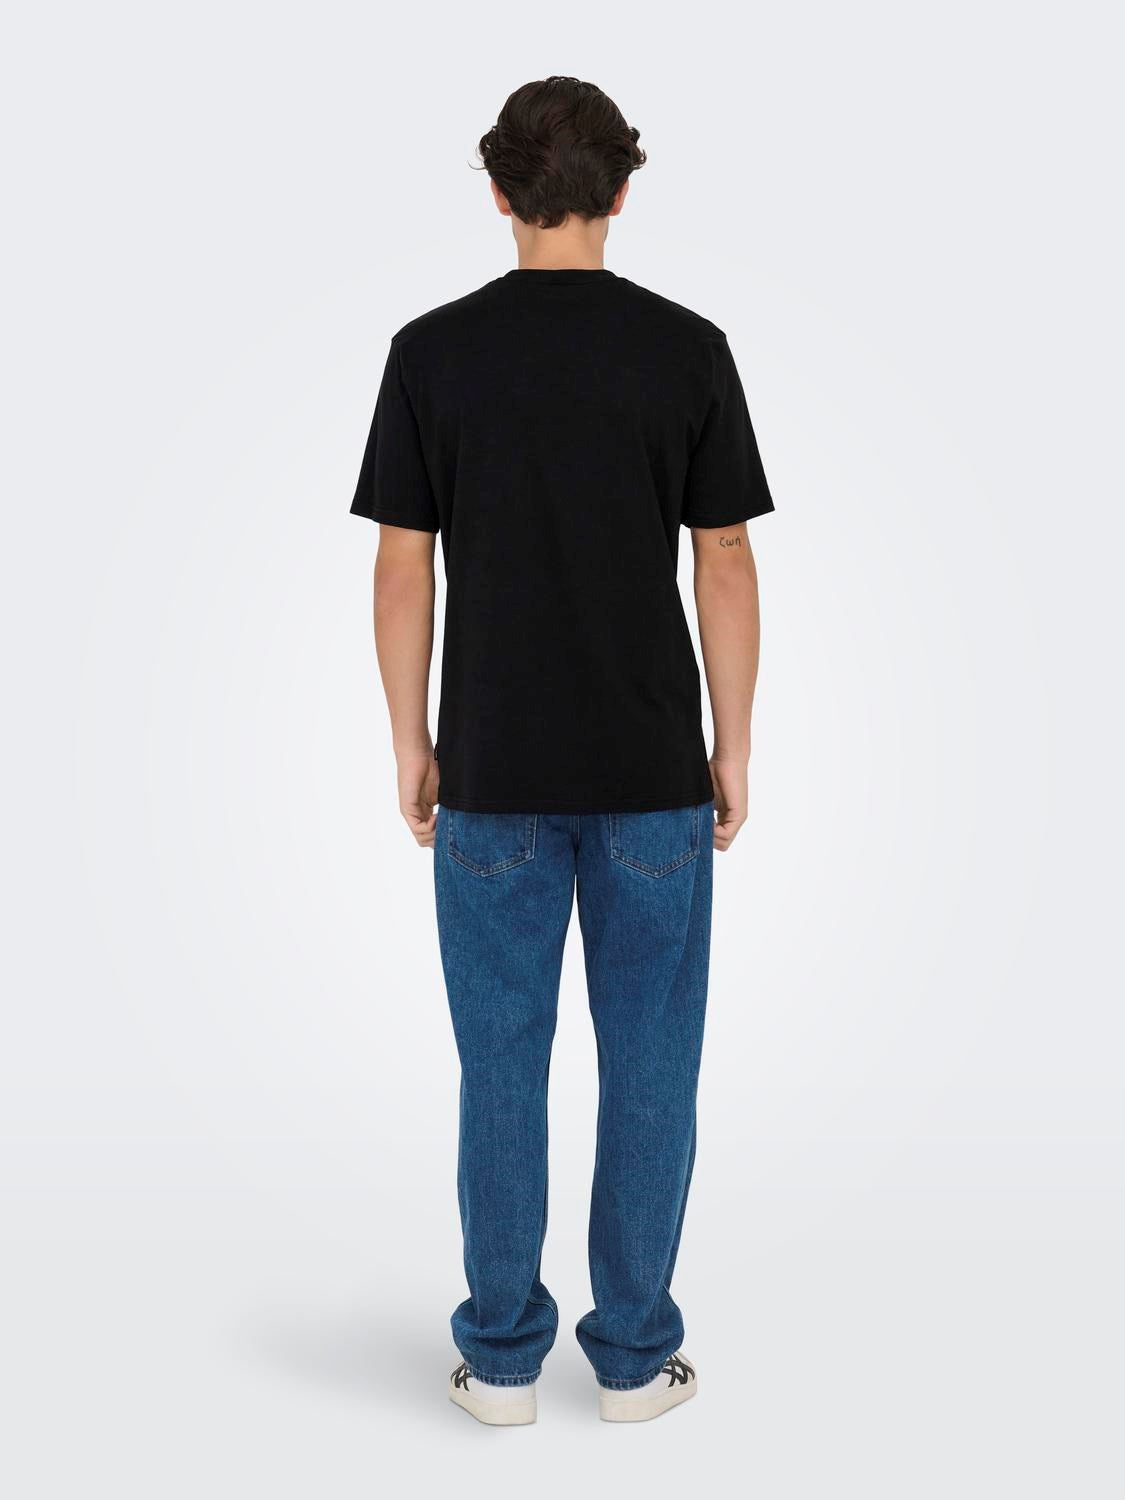 ONLY & SONS T-SHIRT 3D - col. nero